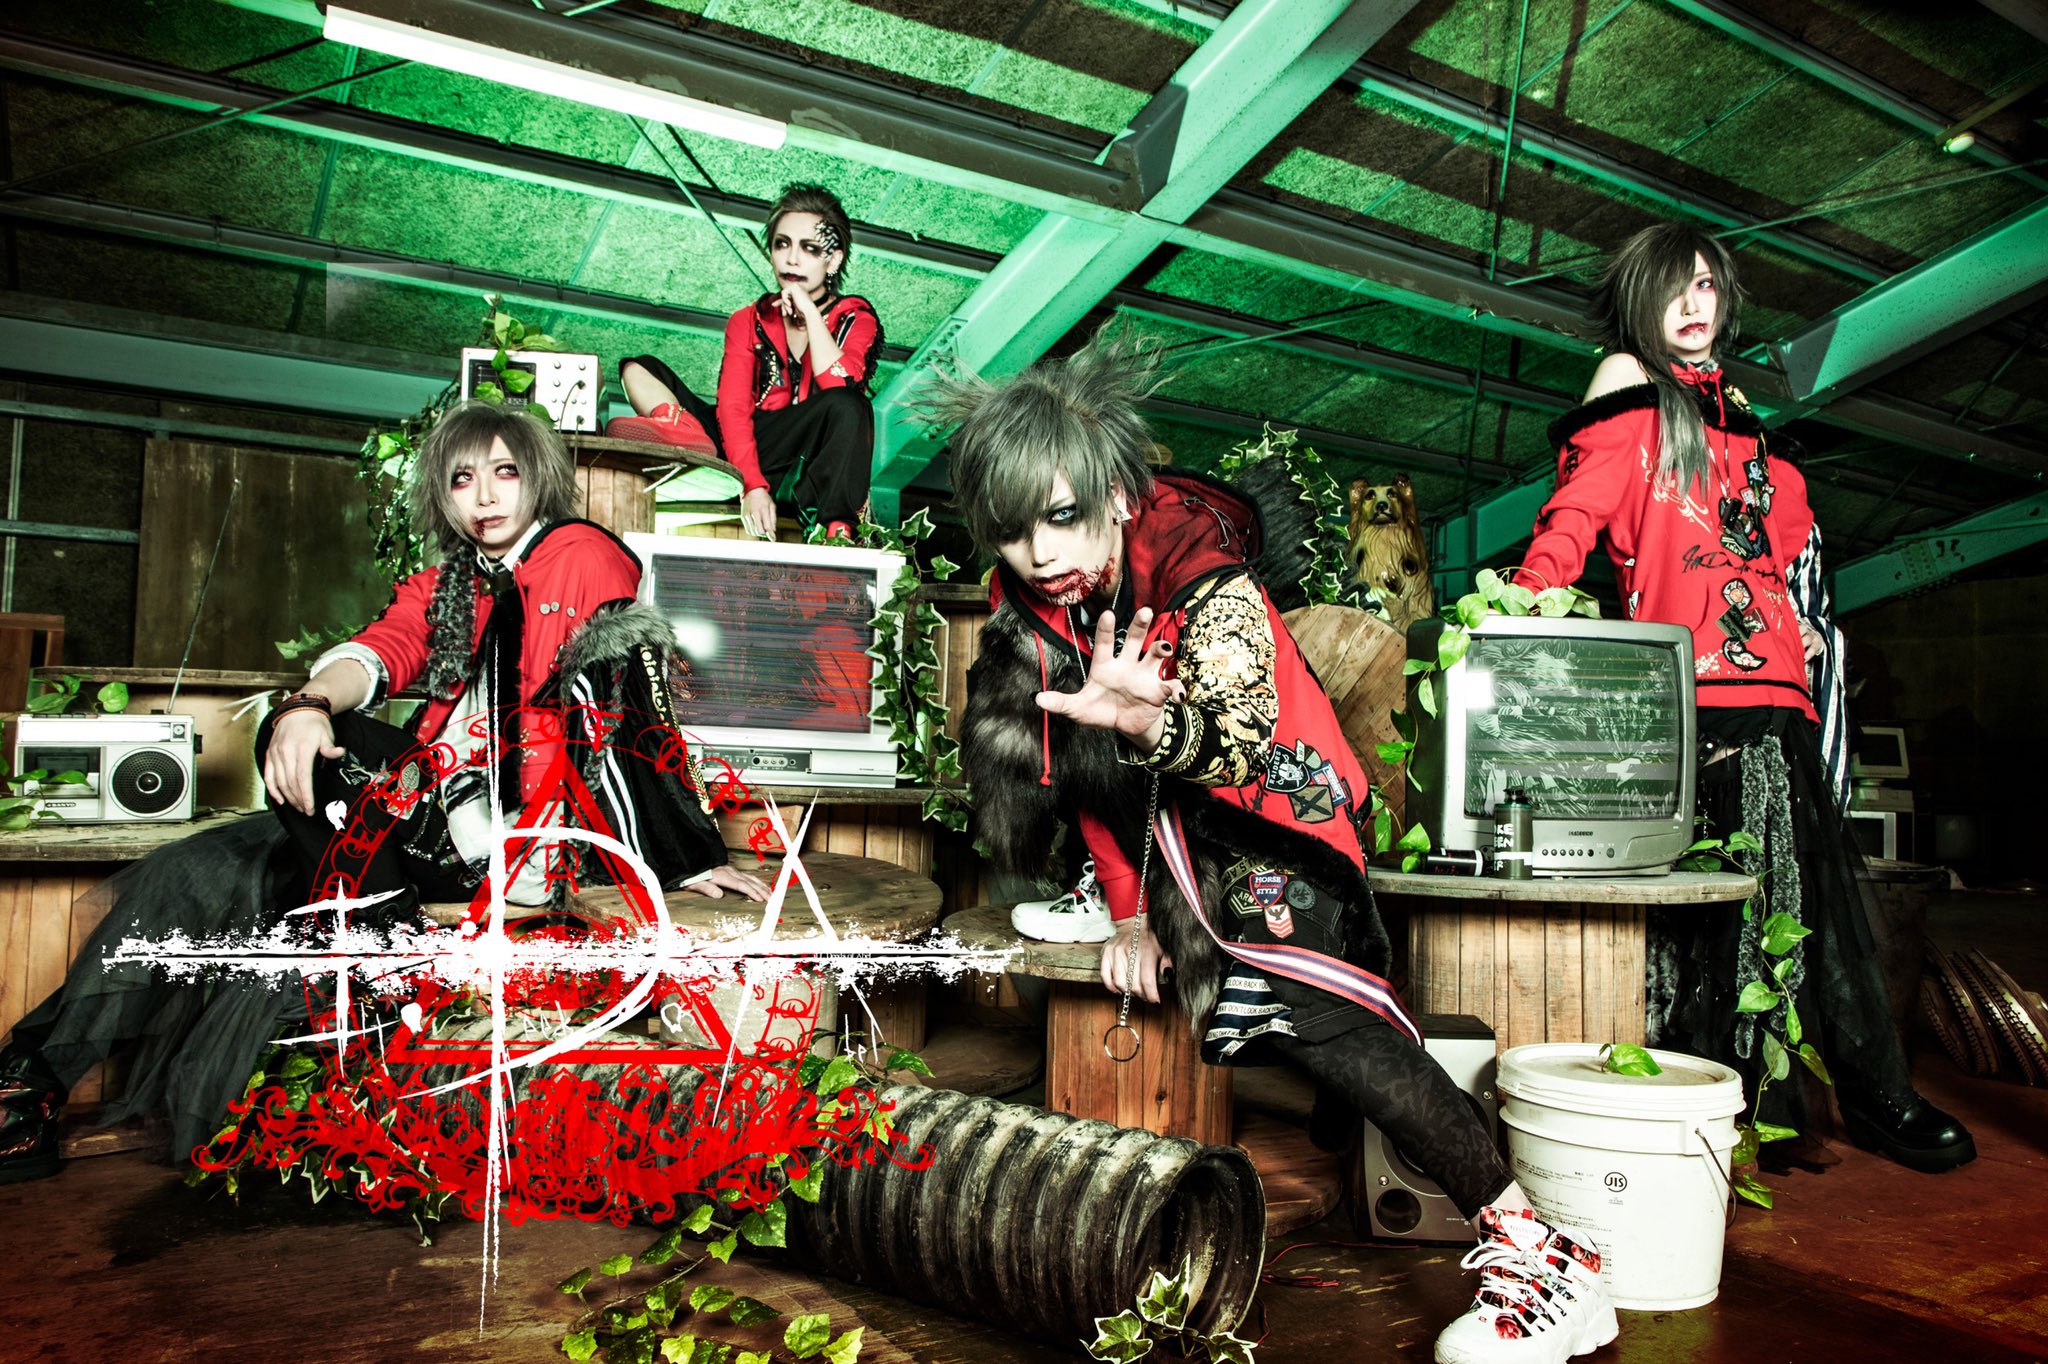 I.D.A – “LLRH.” single details and new MV